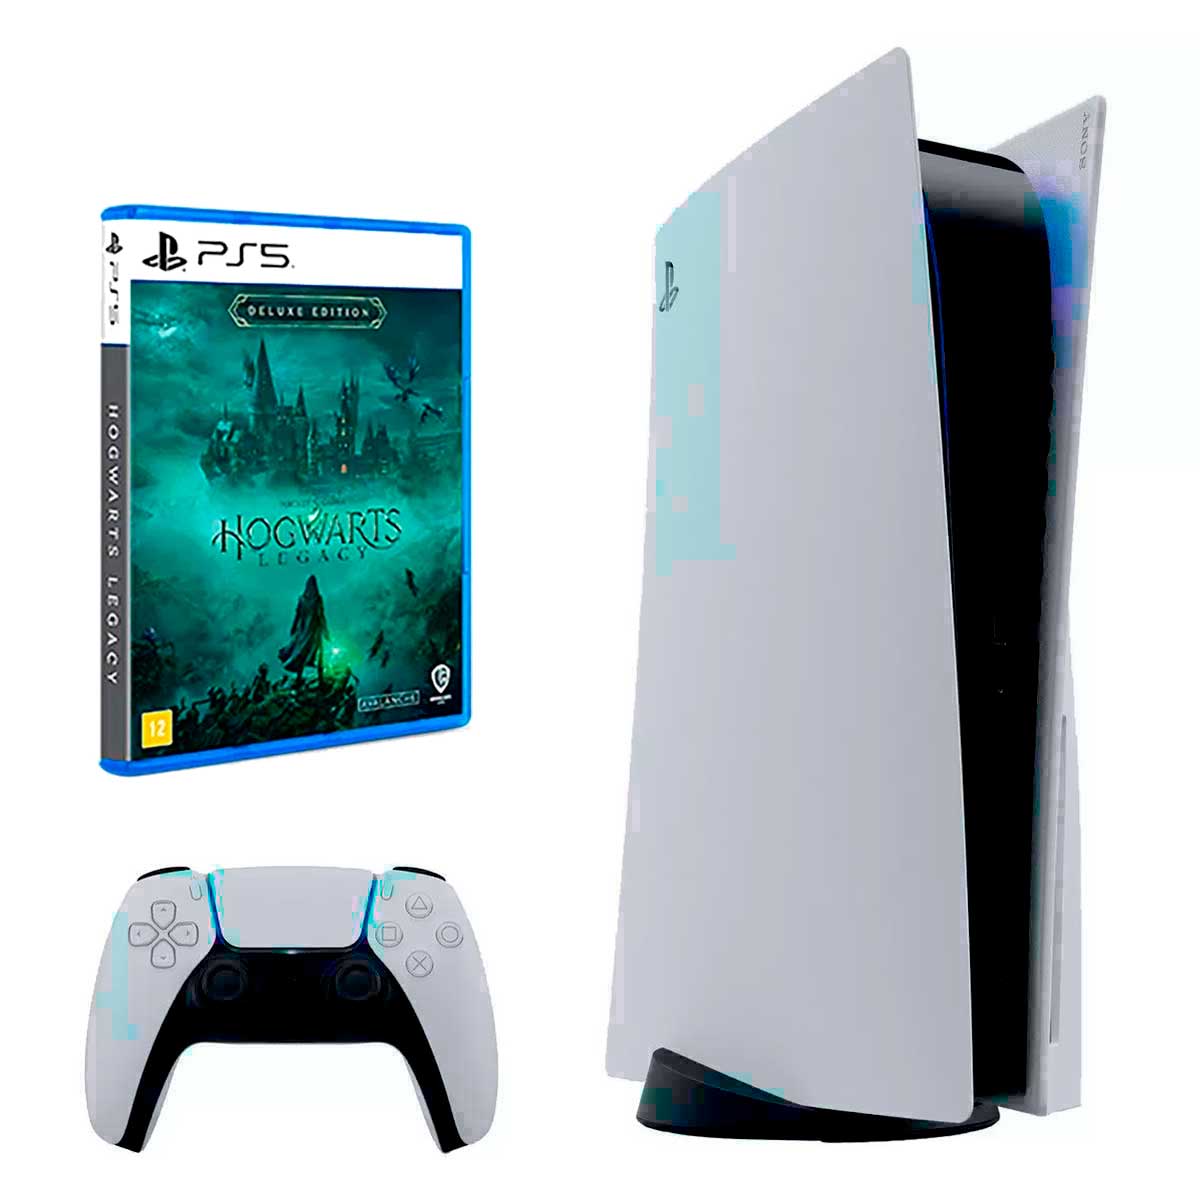 Console Playstation 5 Sony Standard 825GB SSD + Hogwarts Legacy Deluxe Edition BR PS5